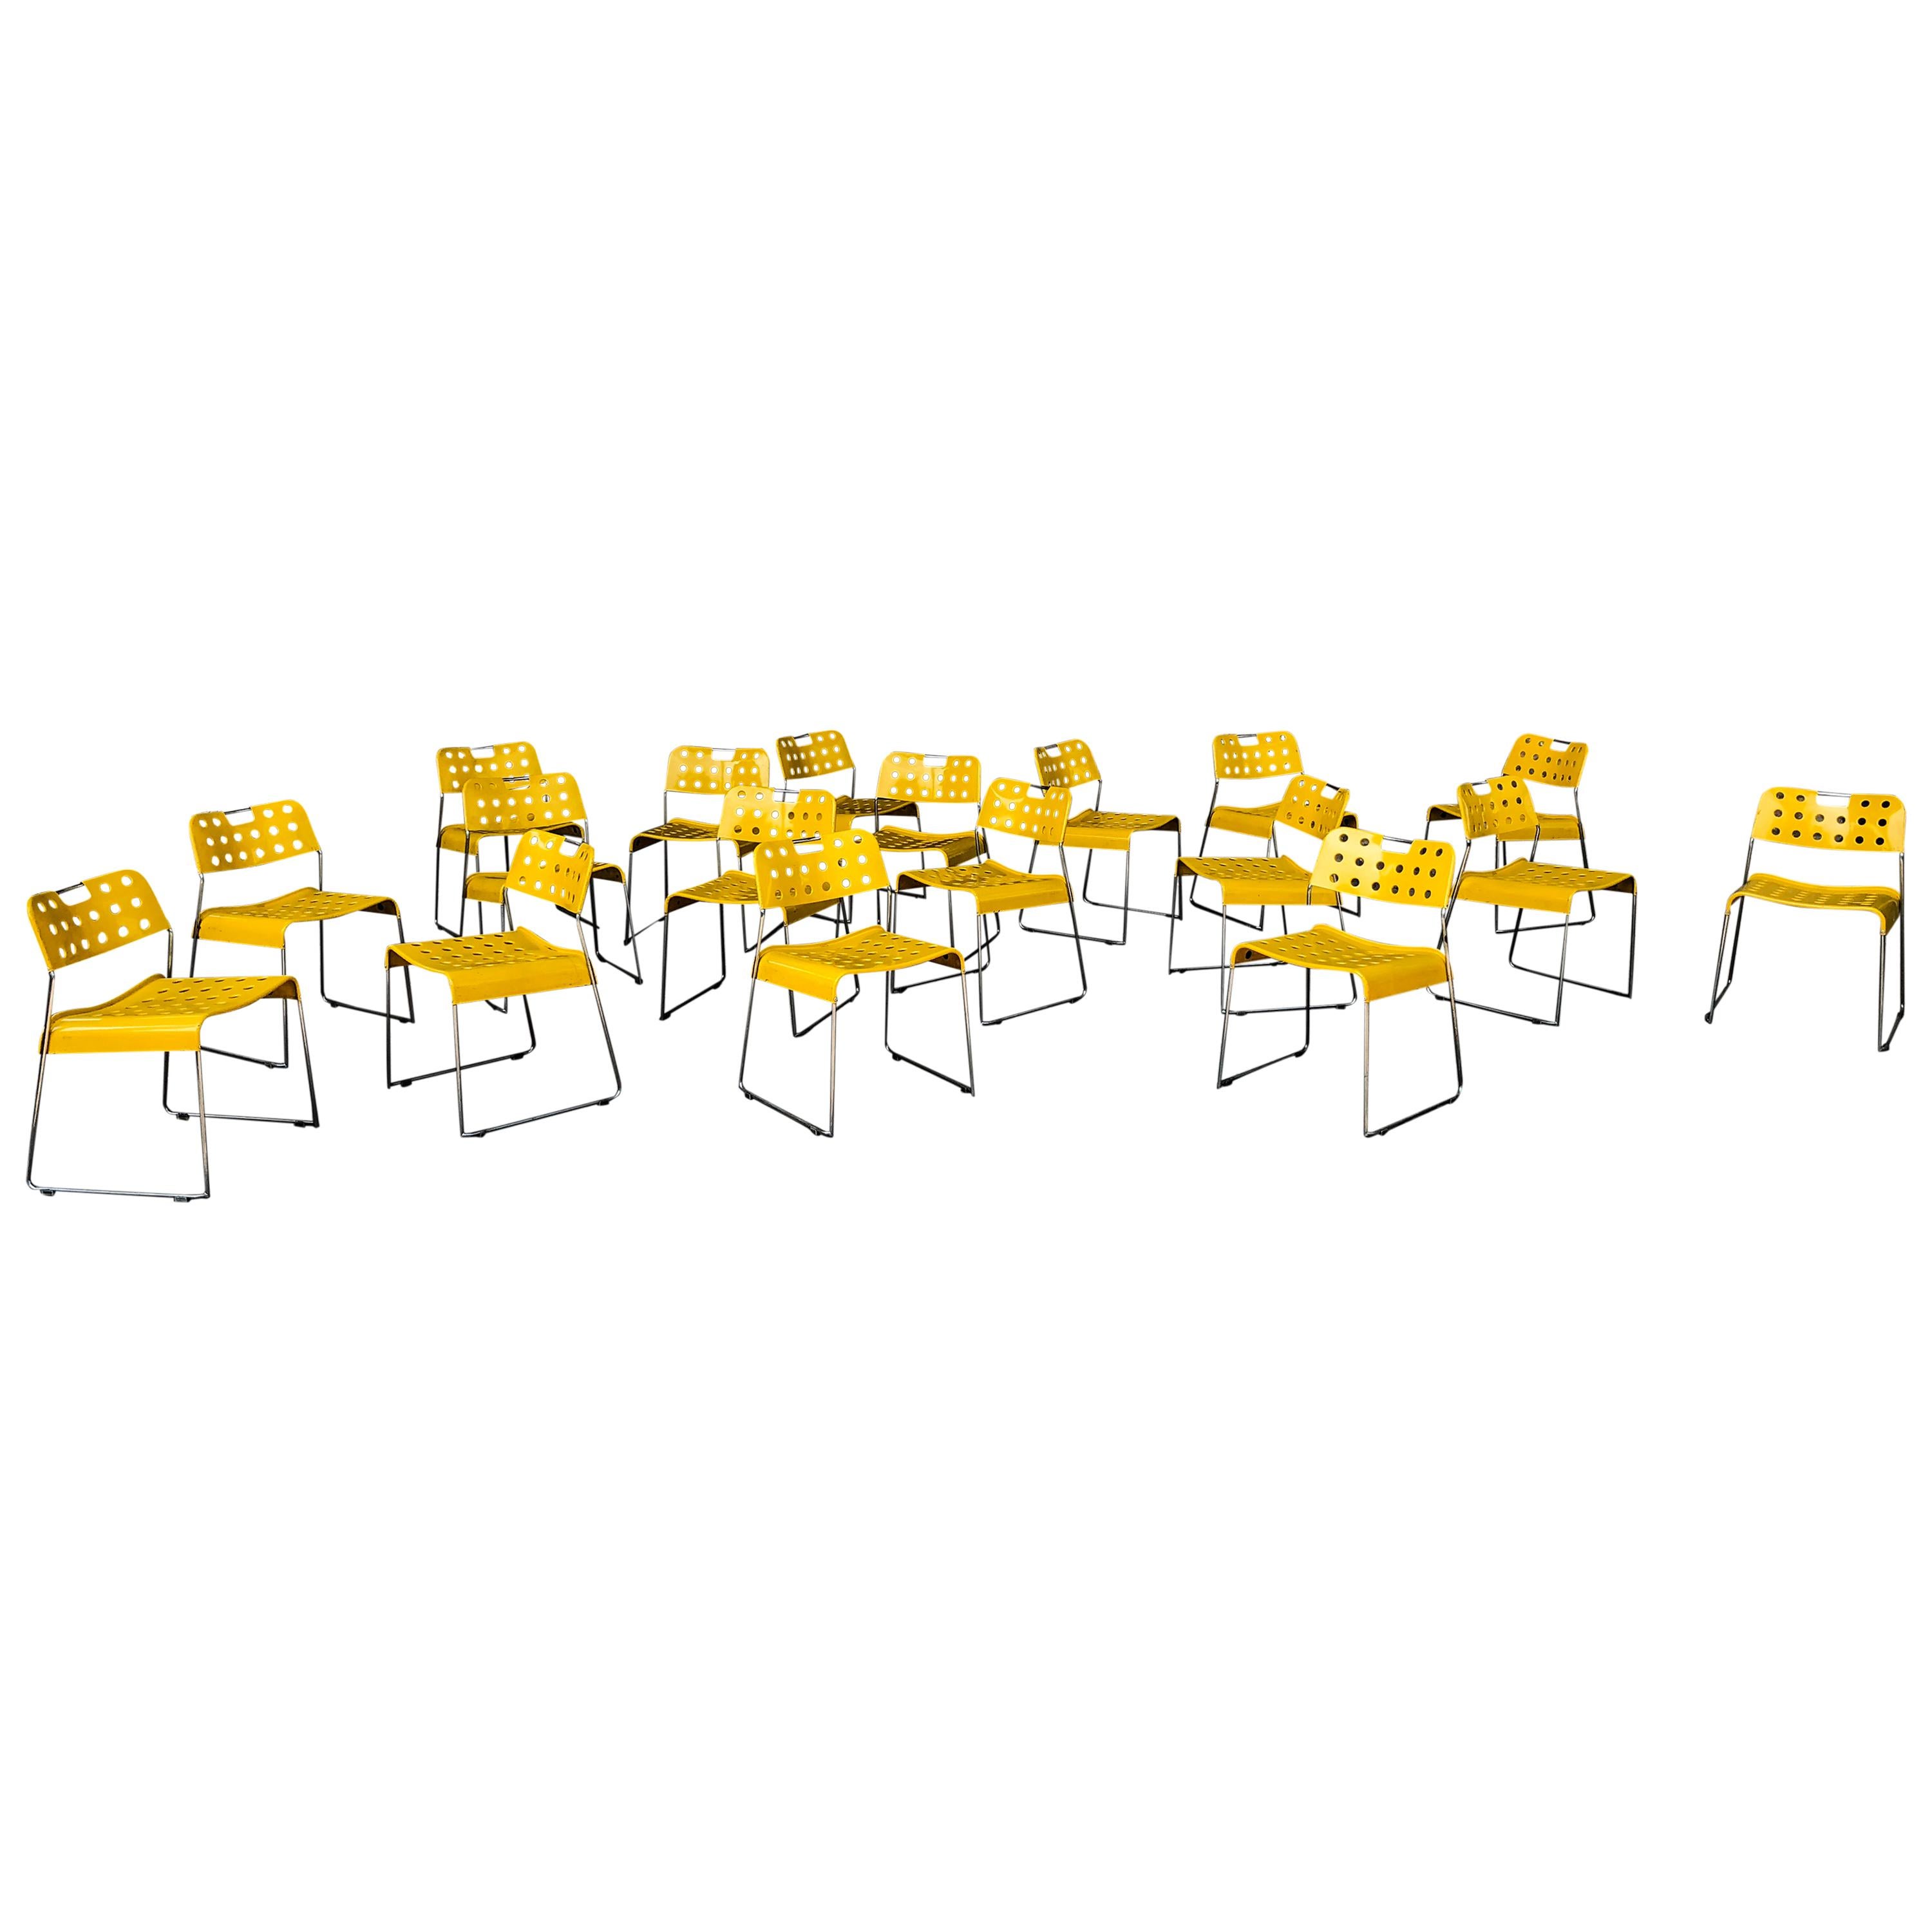 Rodney Kinsman Space Age Yellow Omstak Chair for Bieffeplast, 1971, Set of 8 For Sale 3